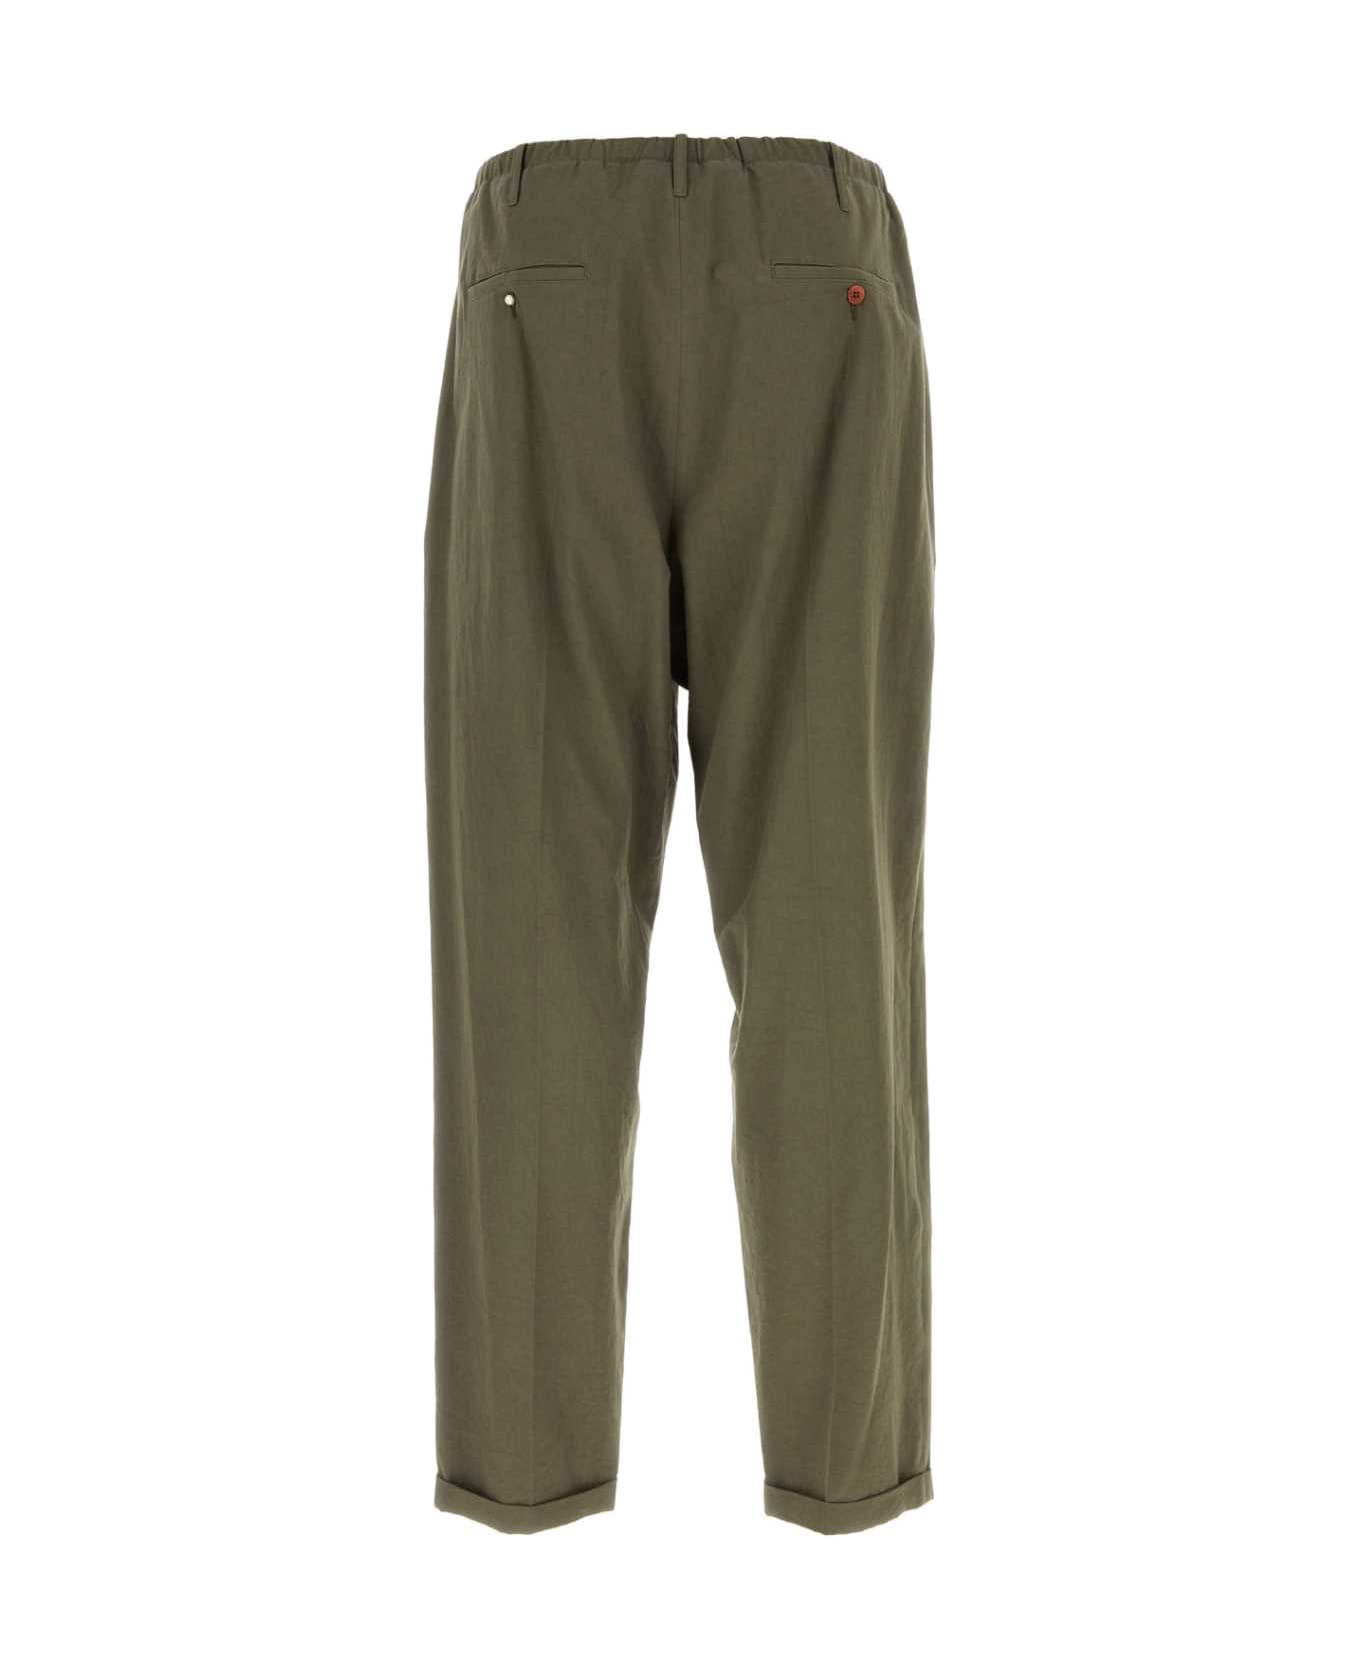 Magliano Army Green Cotton Pant - 03 ボトムス